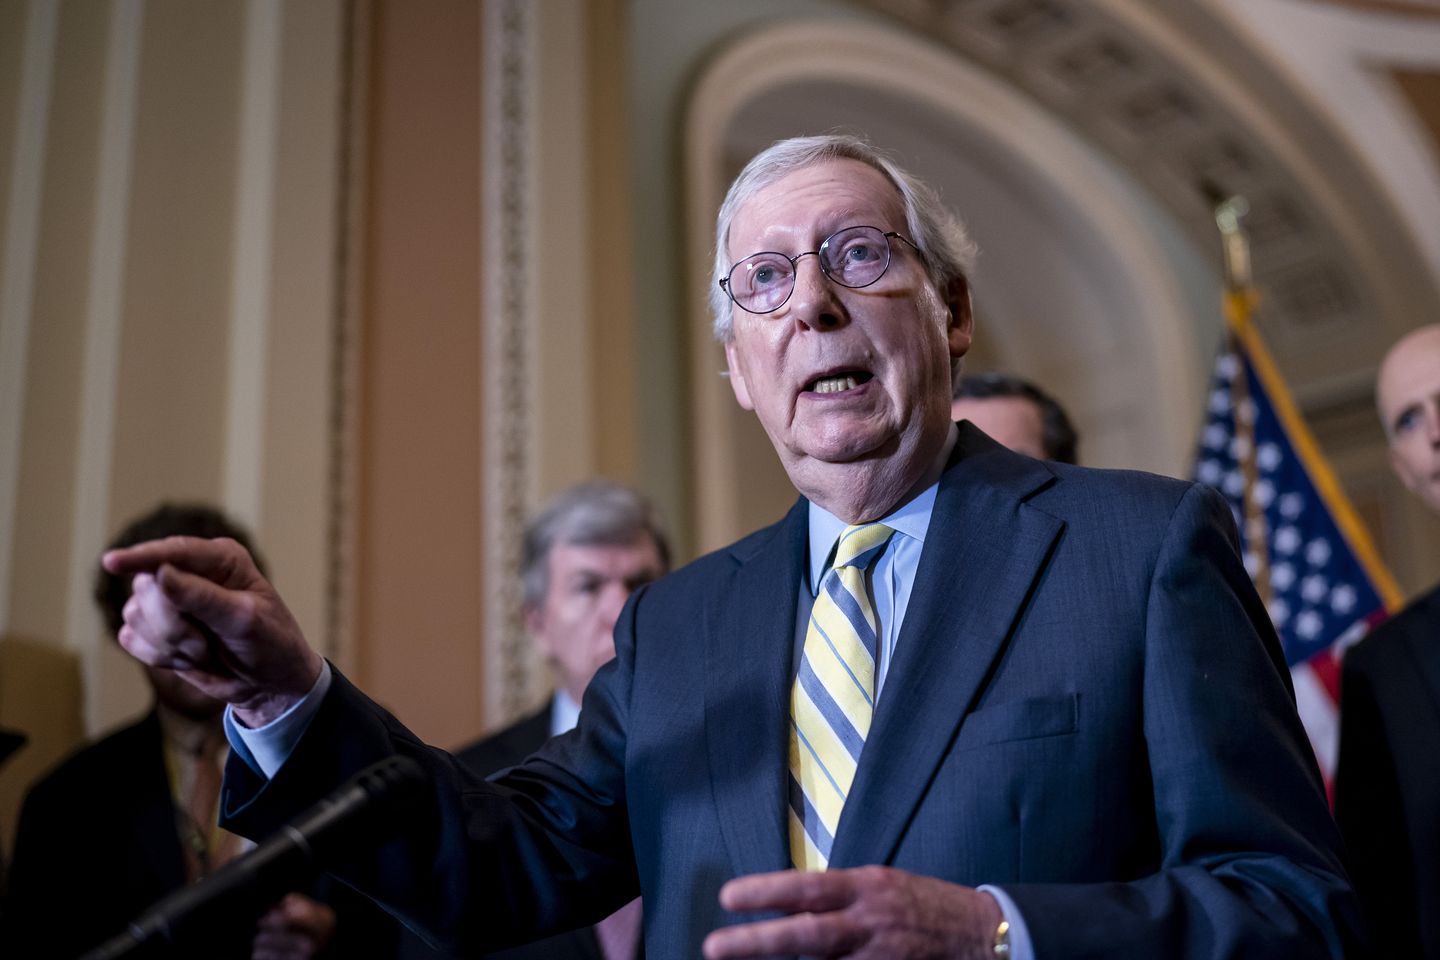 McConnell leads Senate Republicans in unannounced visit to Kyiv